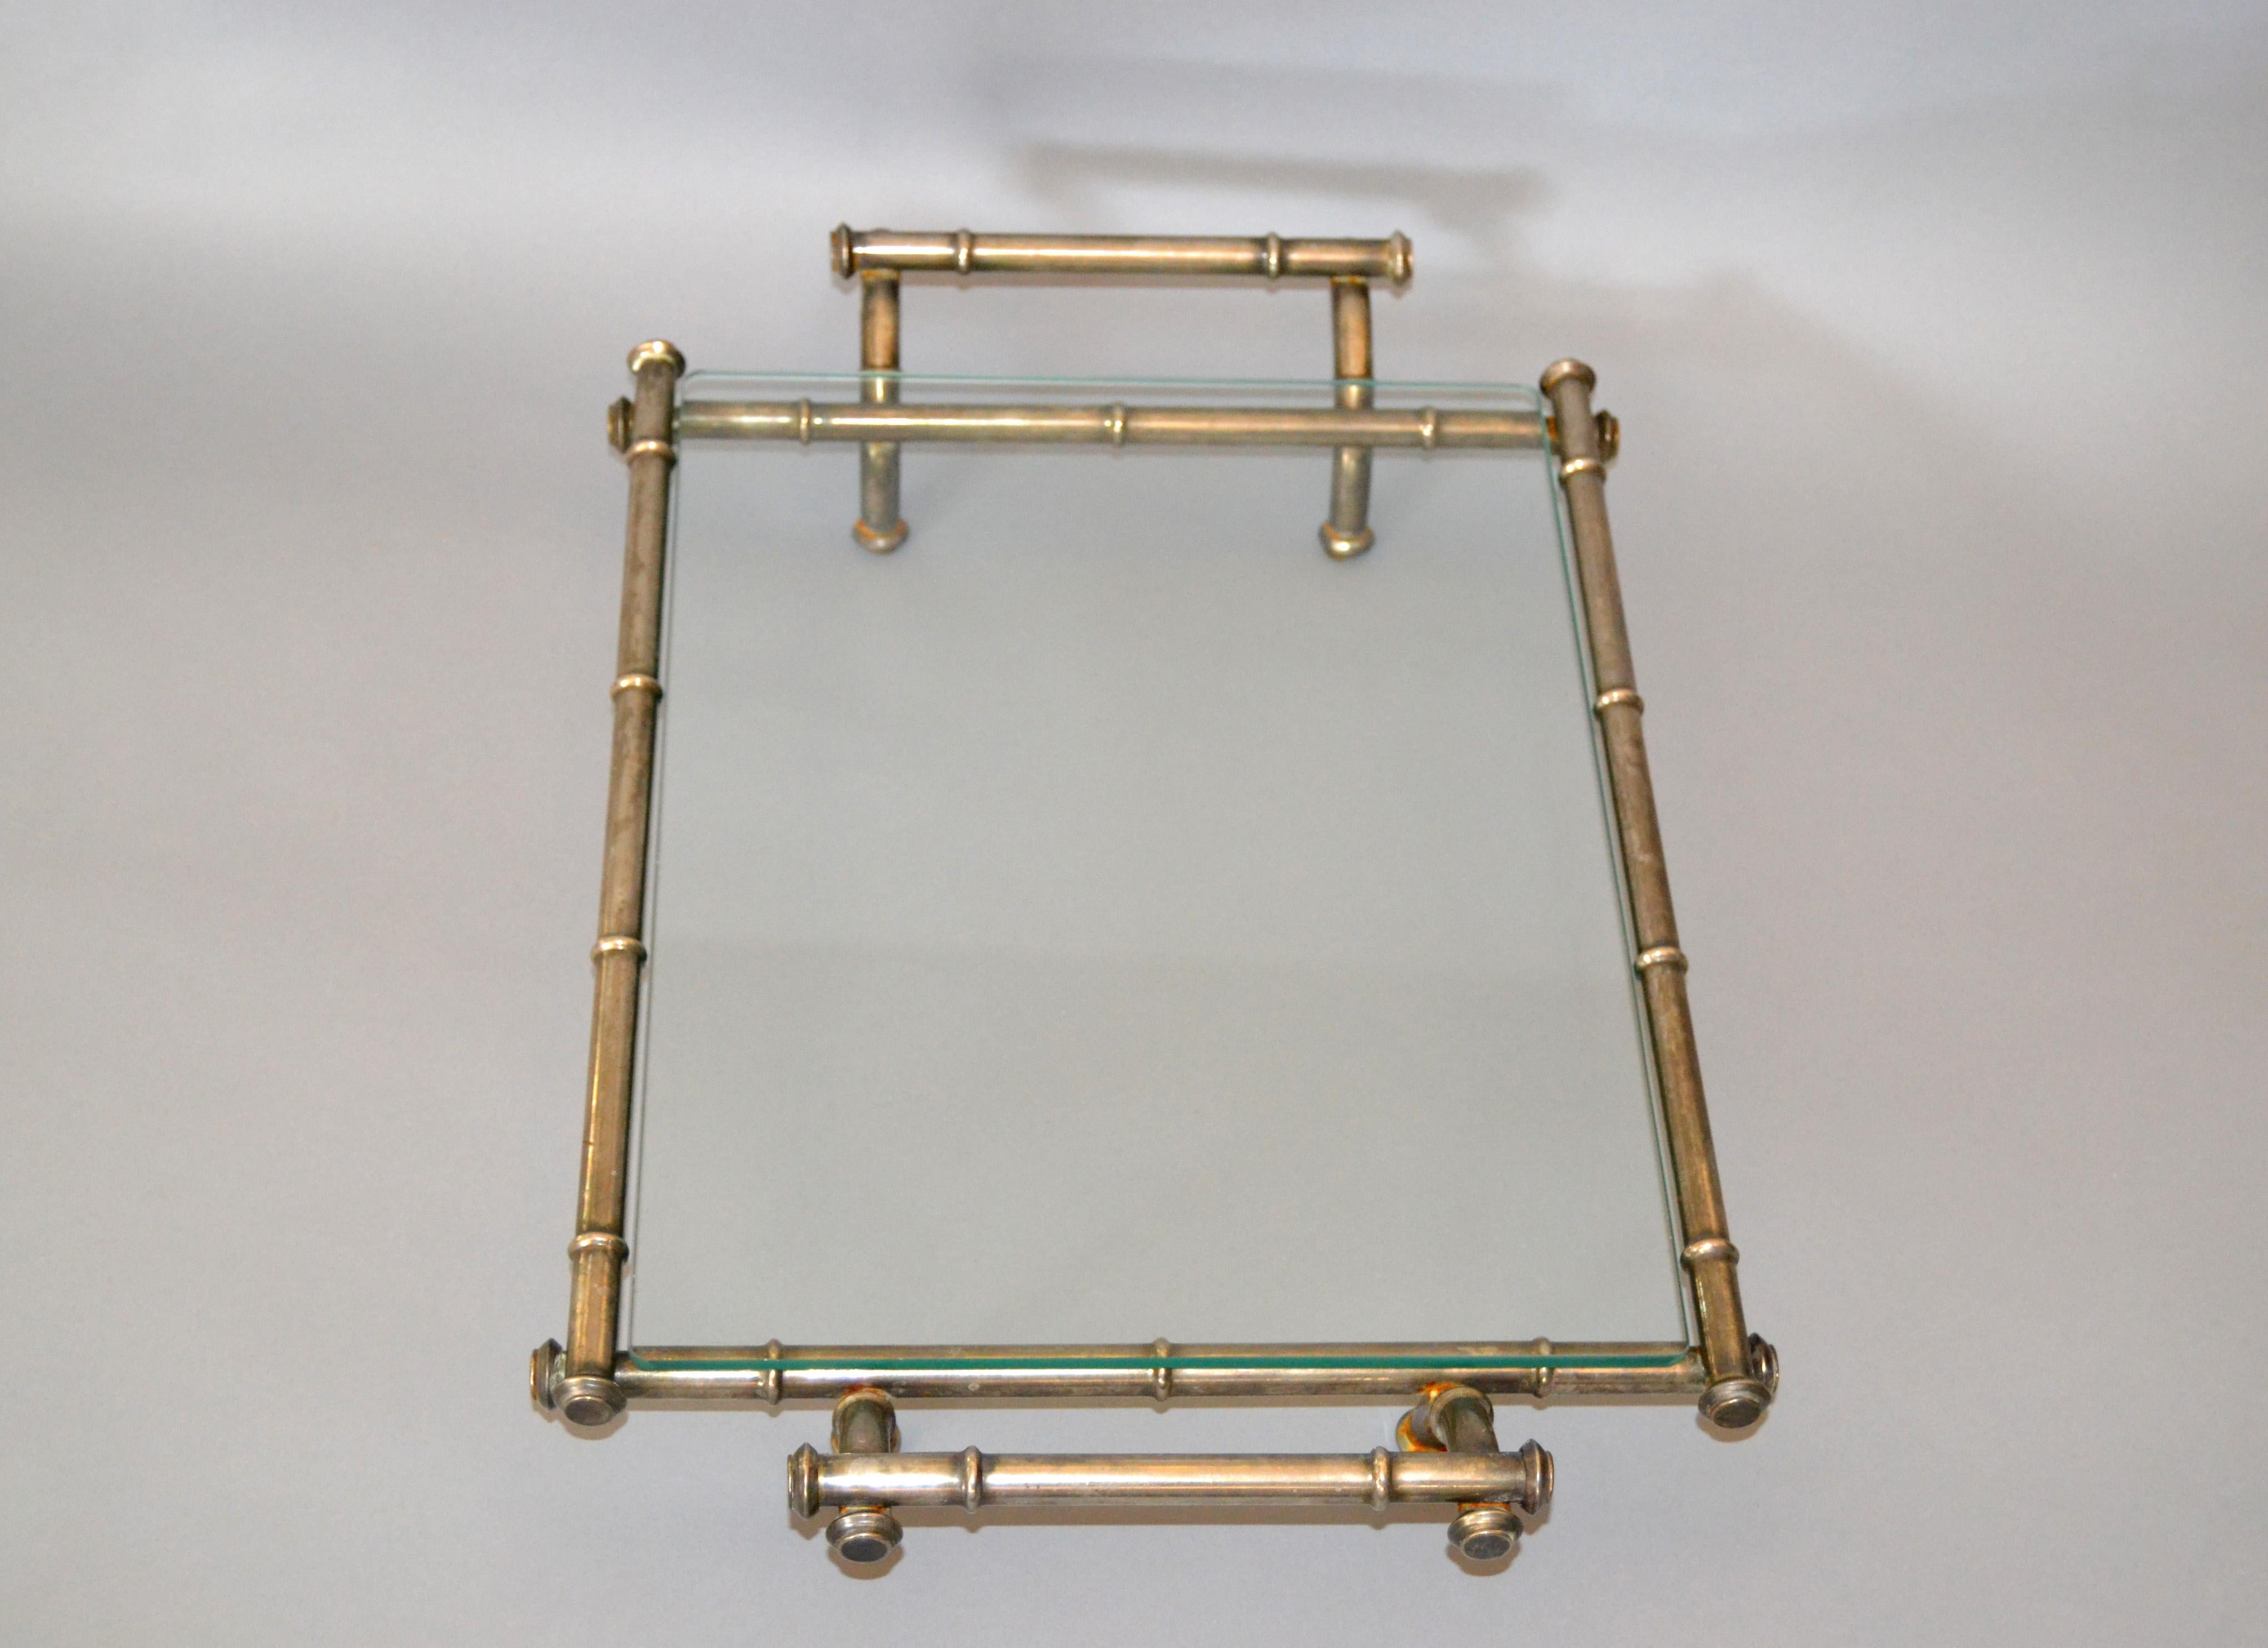 Hollywood Regency faux bamboo metal and glass table tray, serving tray, platter.
Easy to carry around and useful to serve your favourite snacks or for display.